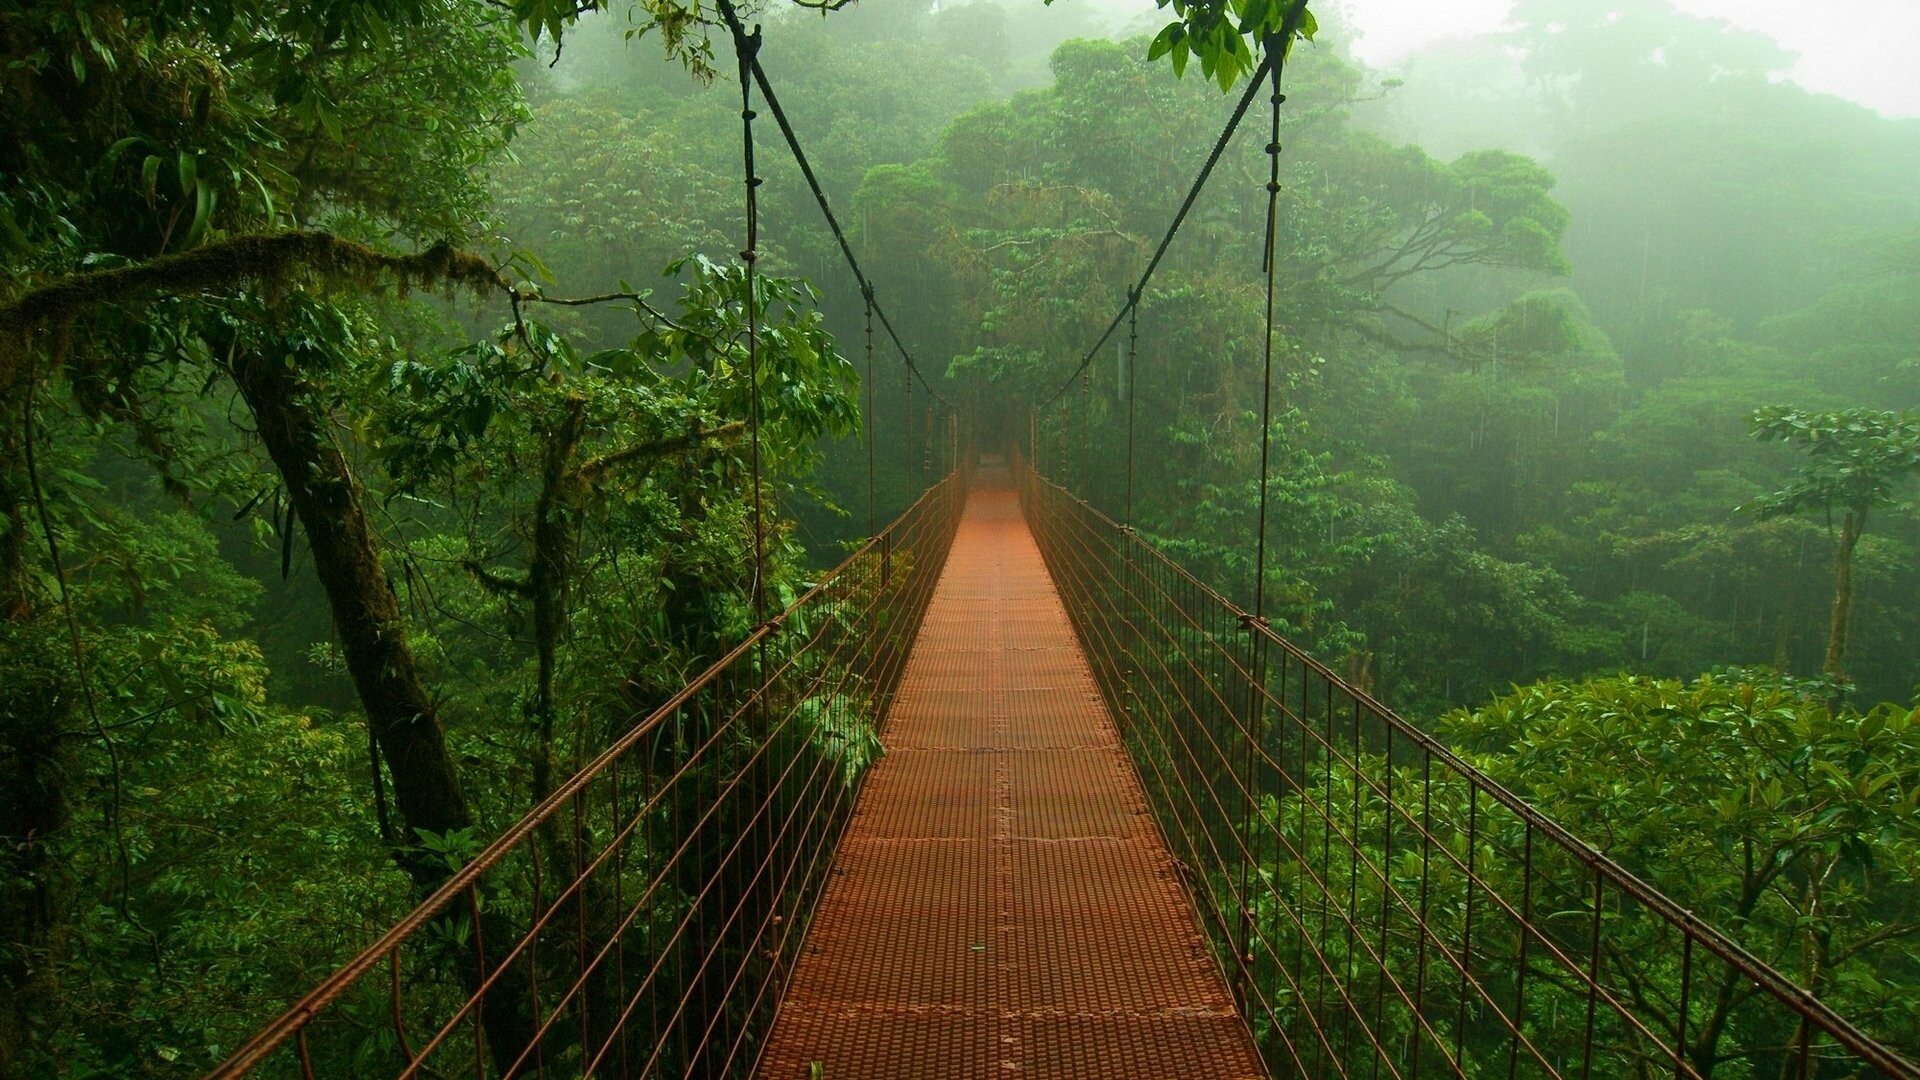 Rainforest: Canopy walkway for seeing the diverse tropical woodland in Costa Rica. 1920x1080 Full HD Wallpaper.